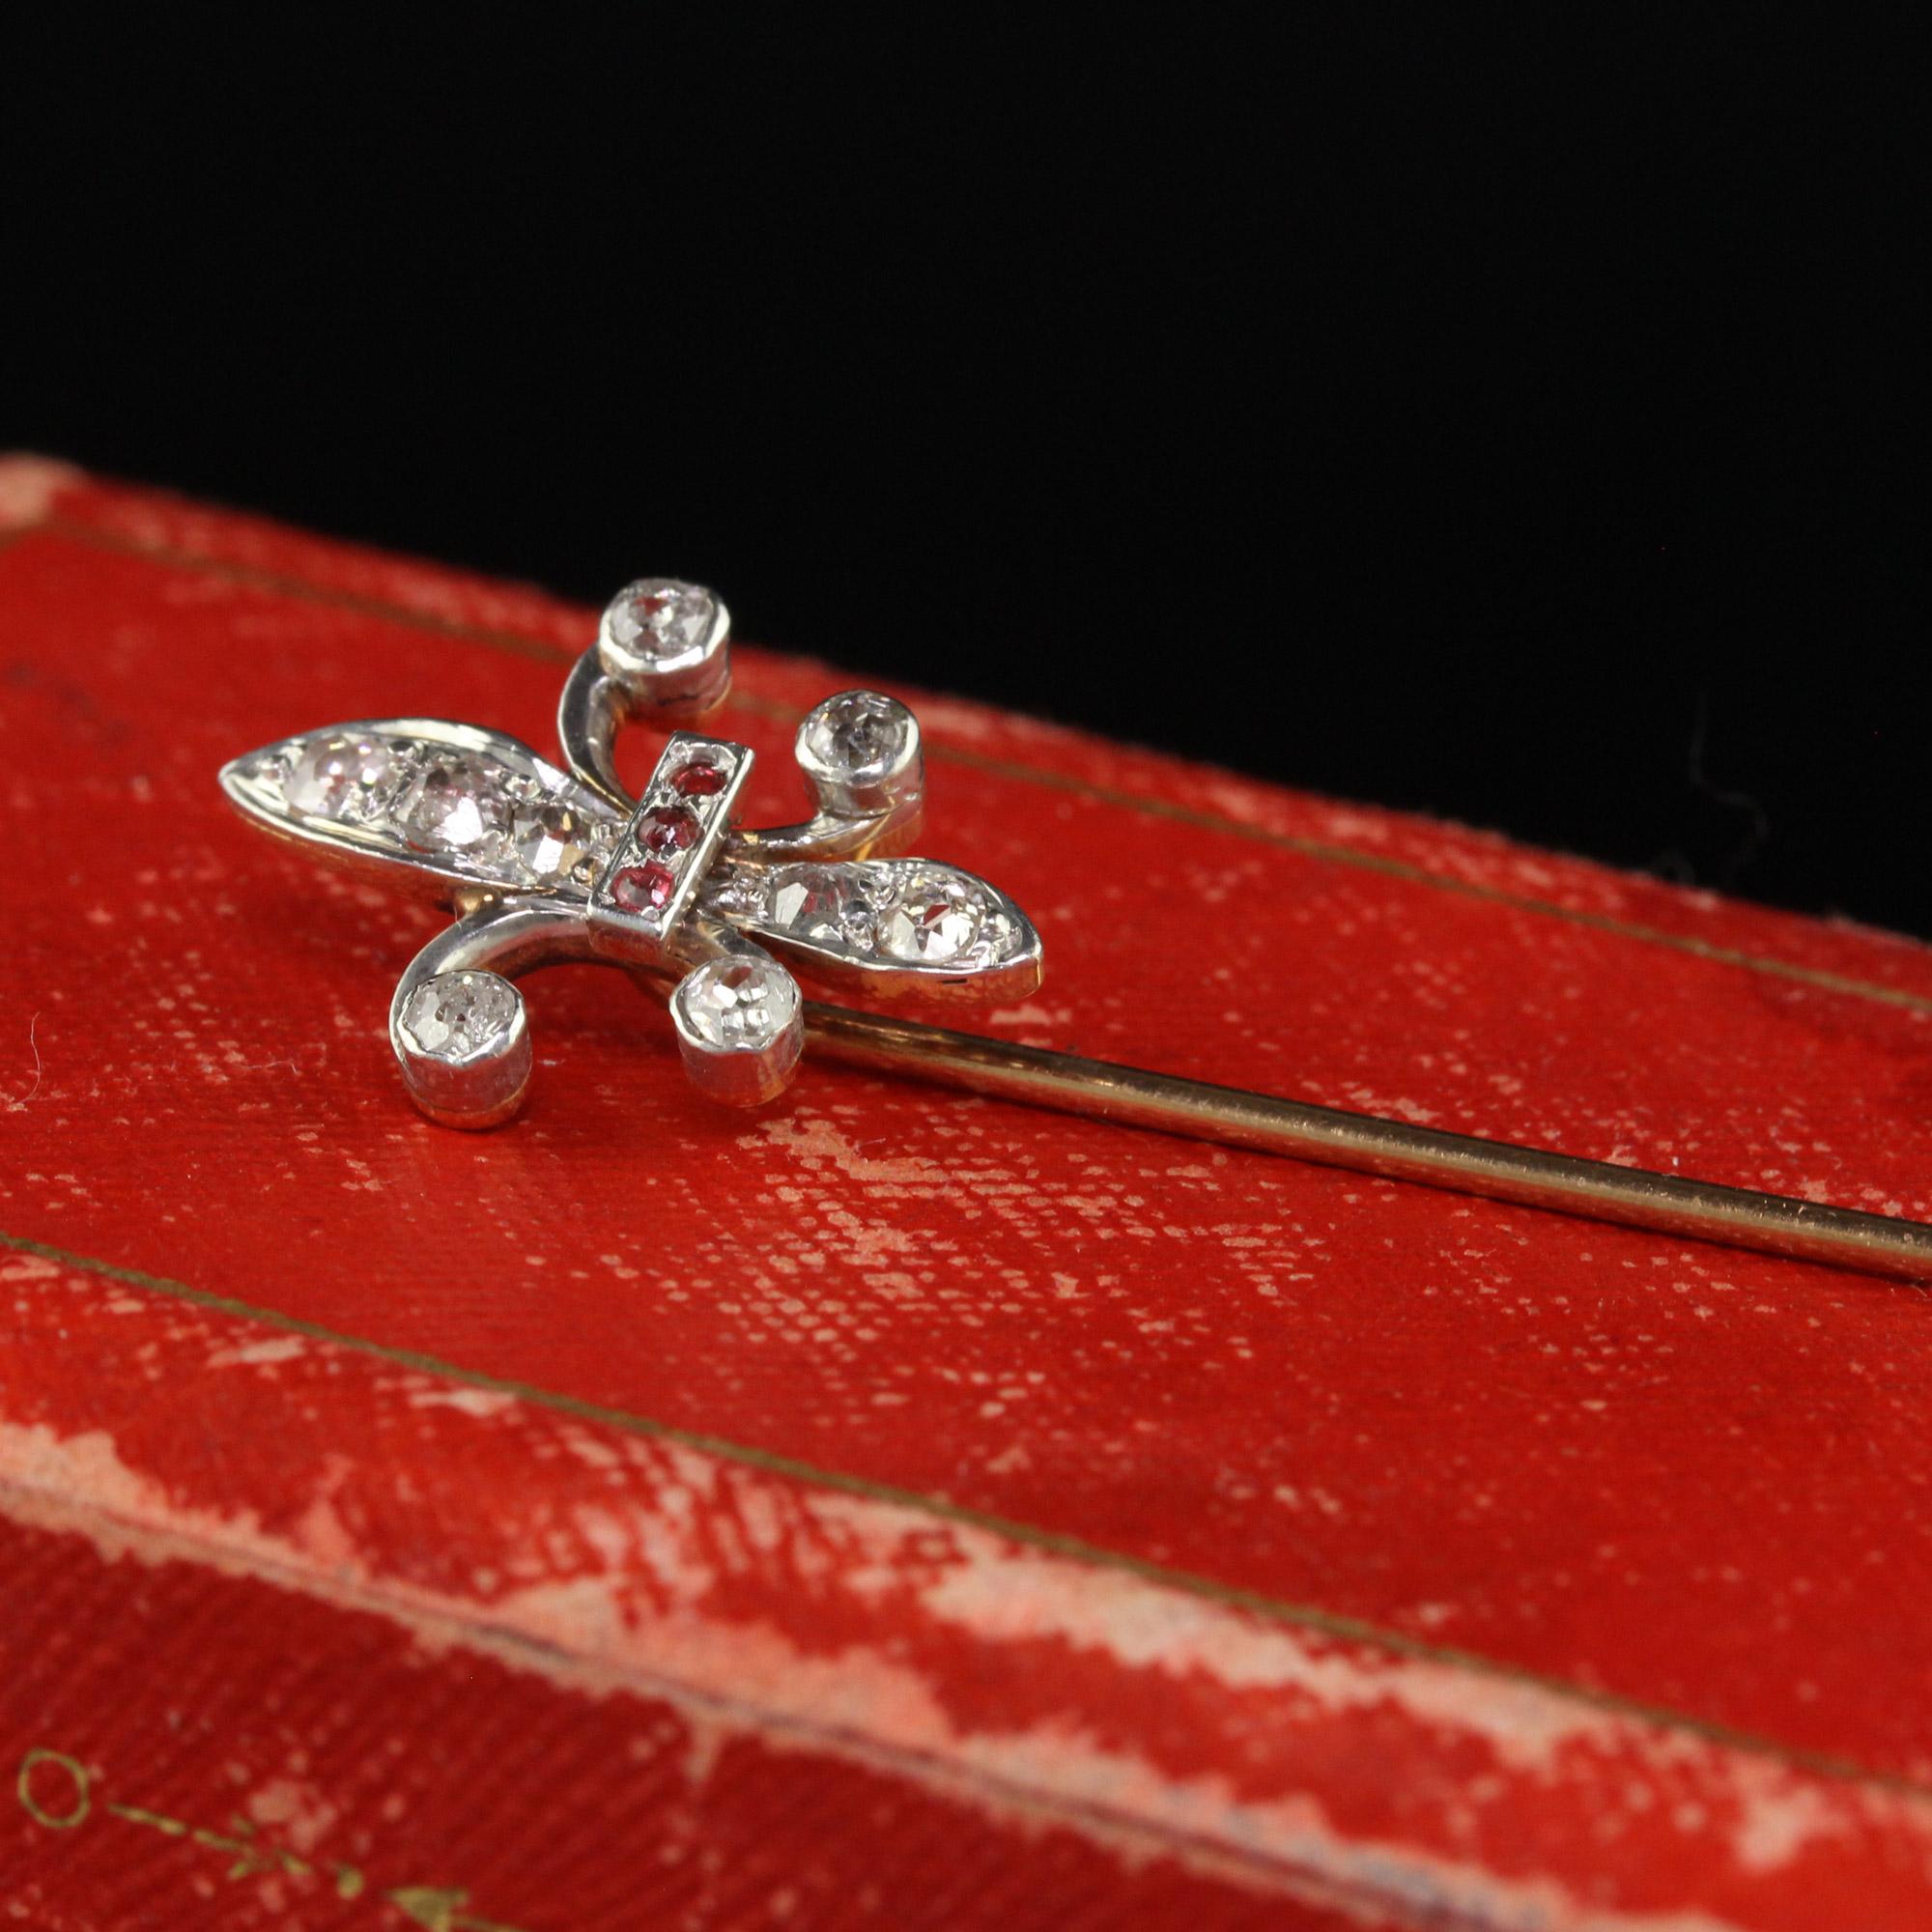 Antique Art Deco 18K Gold and Platinum Fleur De Lis Diamond Stick Pin In Good Condition For Sale In Great Neck, NY